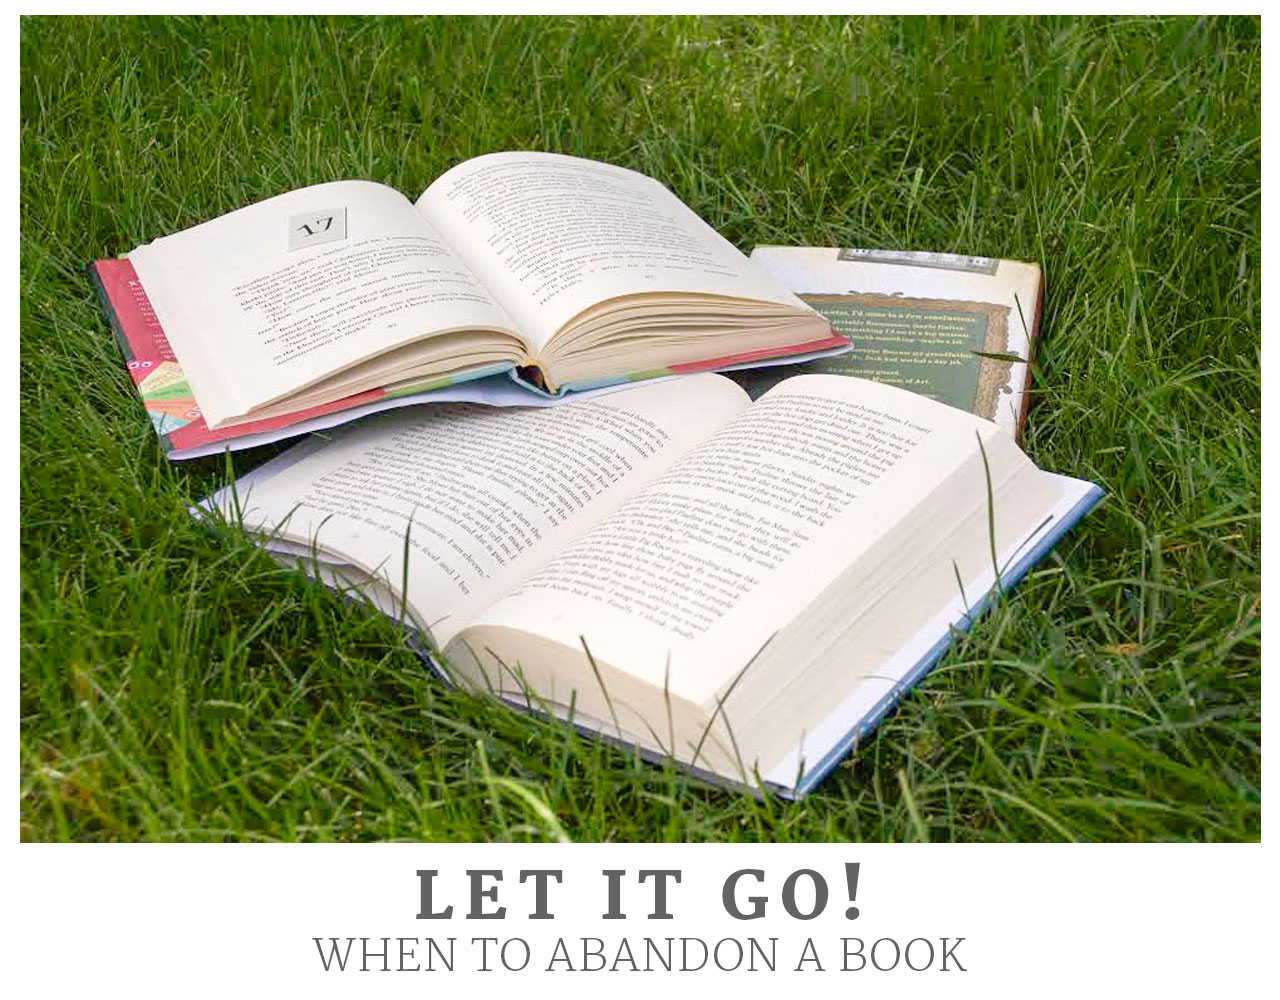 Let it Go! When to Abandon a Book